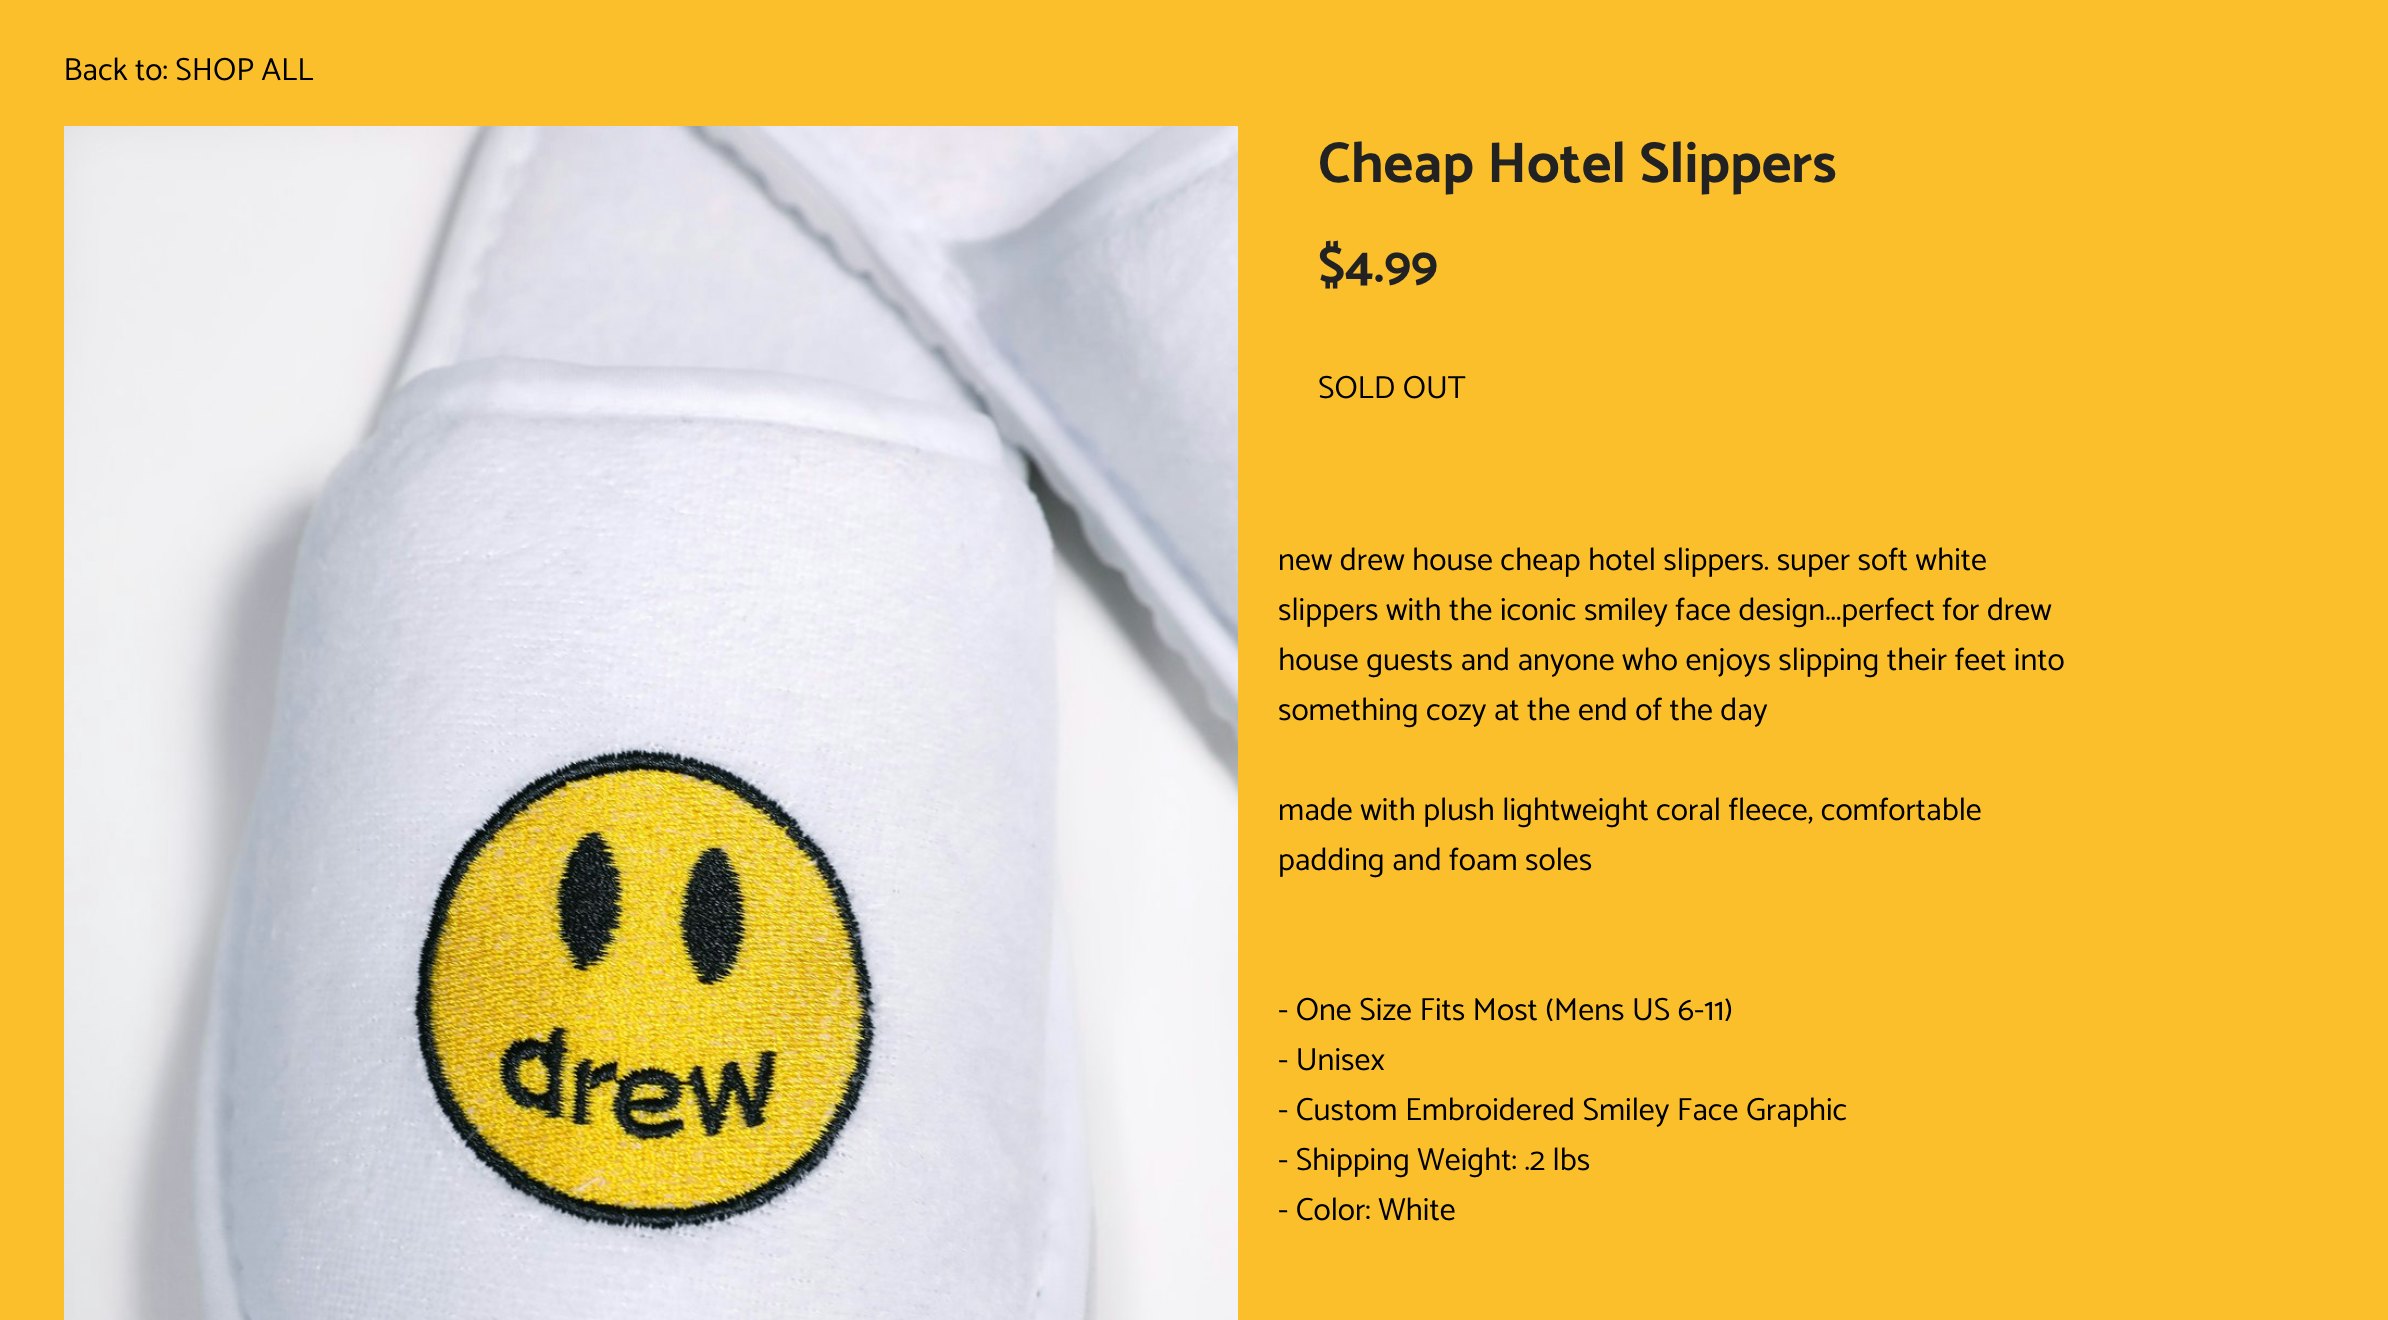 drew house slippers for sale